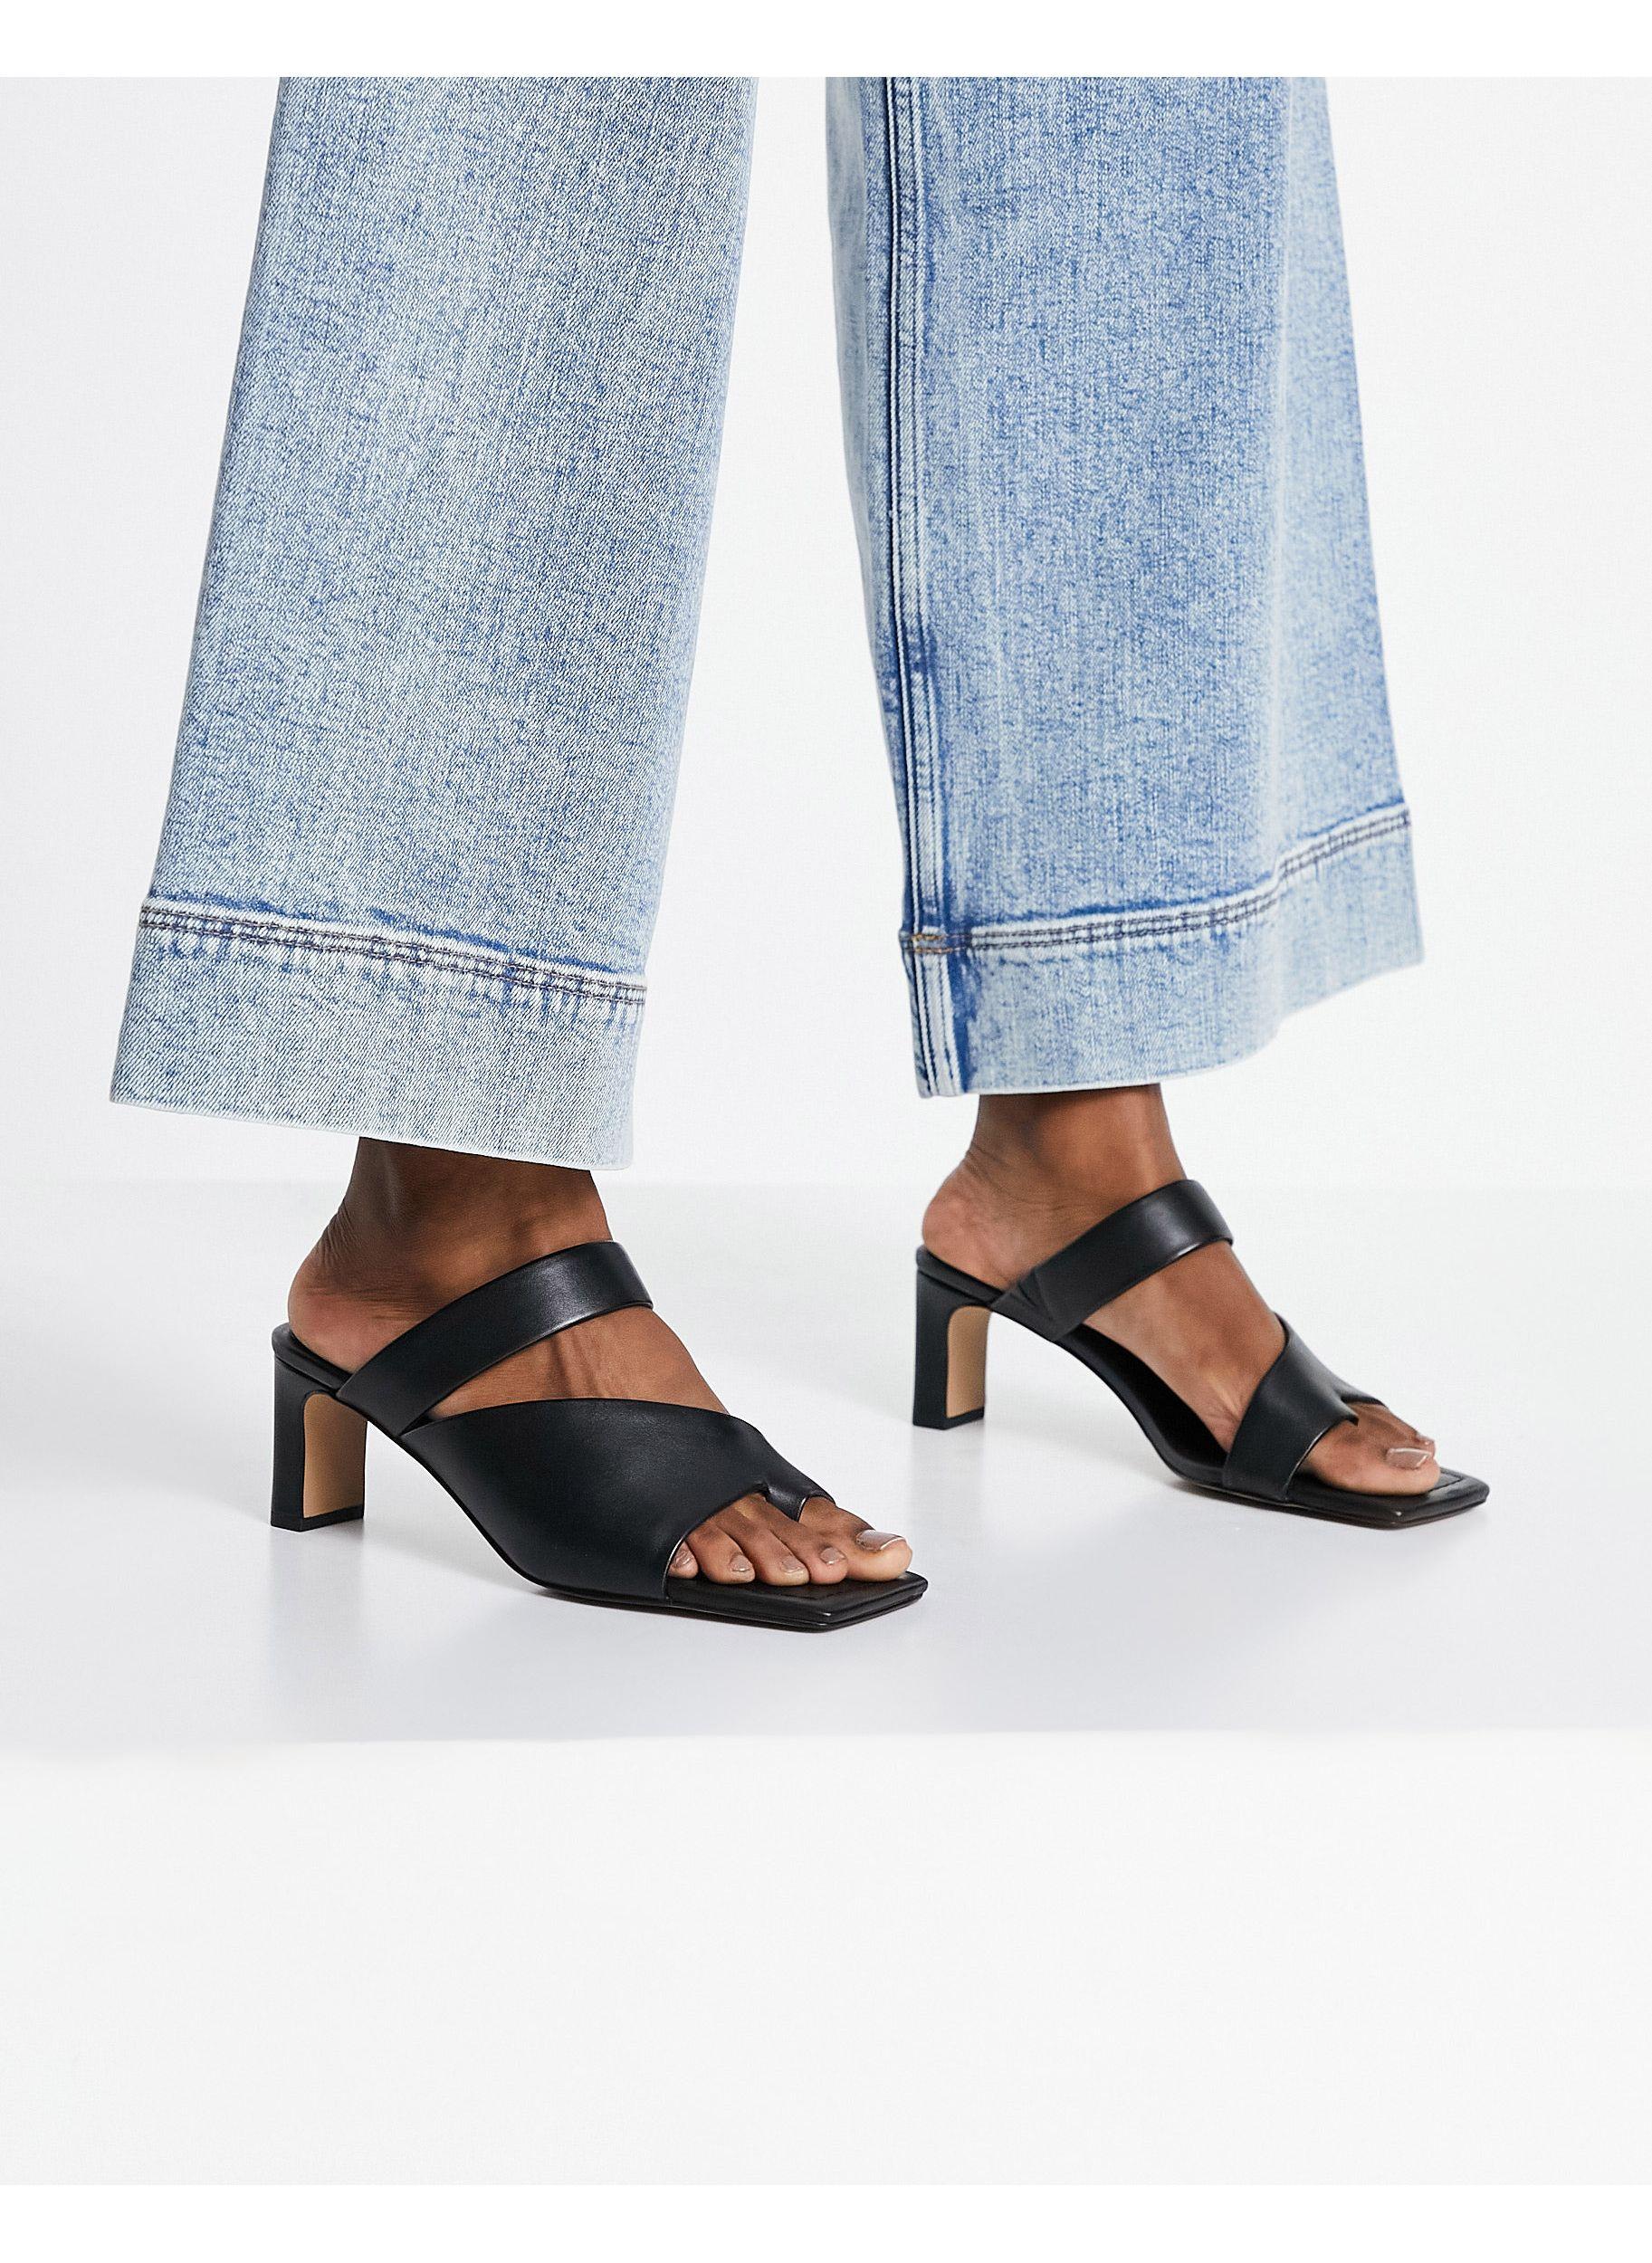 medlem Atlas Kemiker & Other Stories Leather Heeled Sandals With Toe Post in Black | Lyst